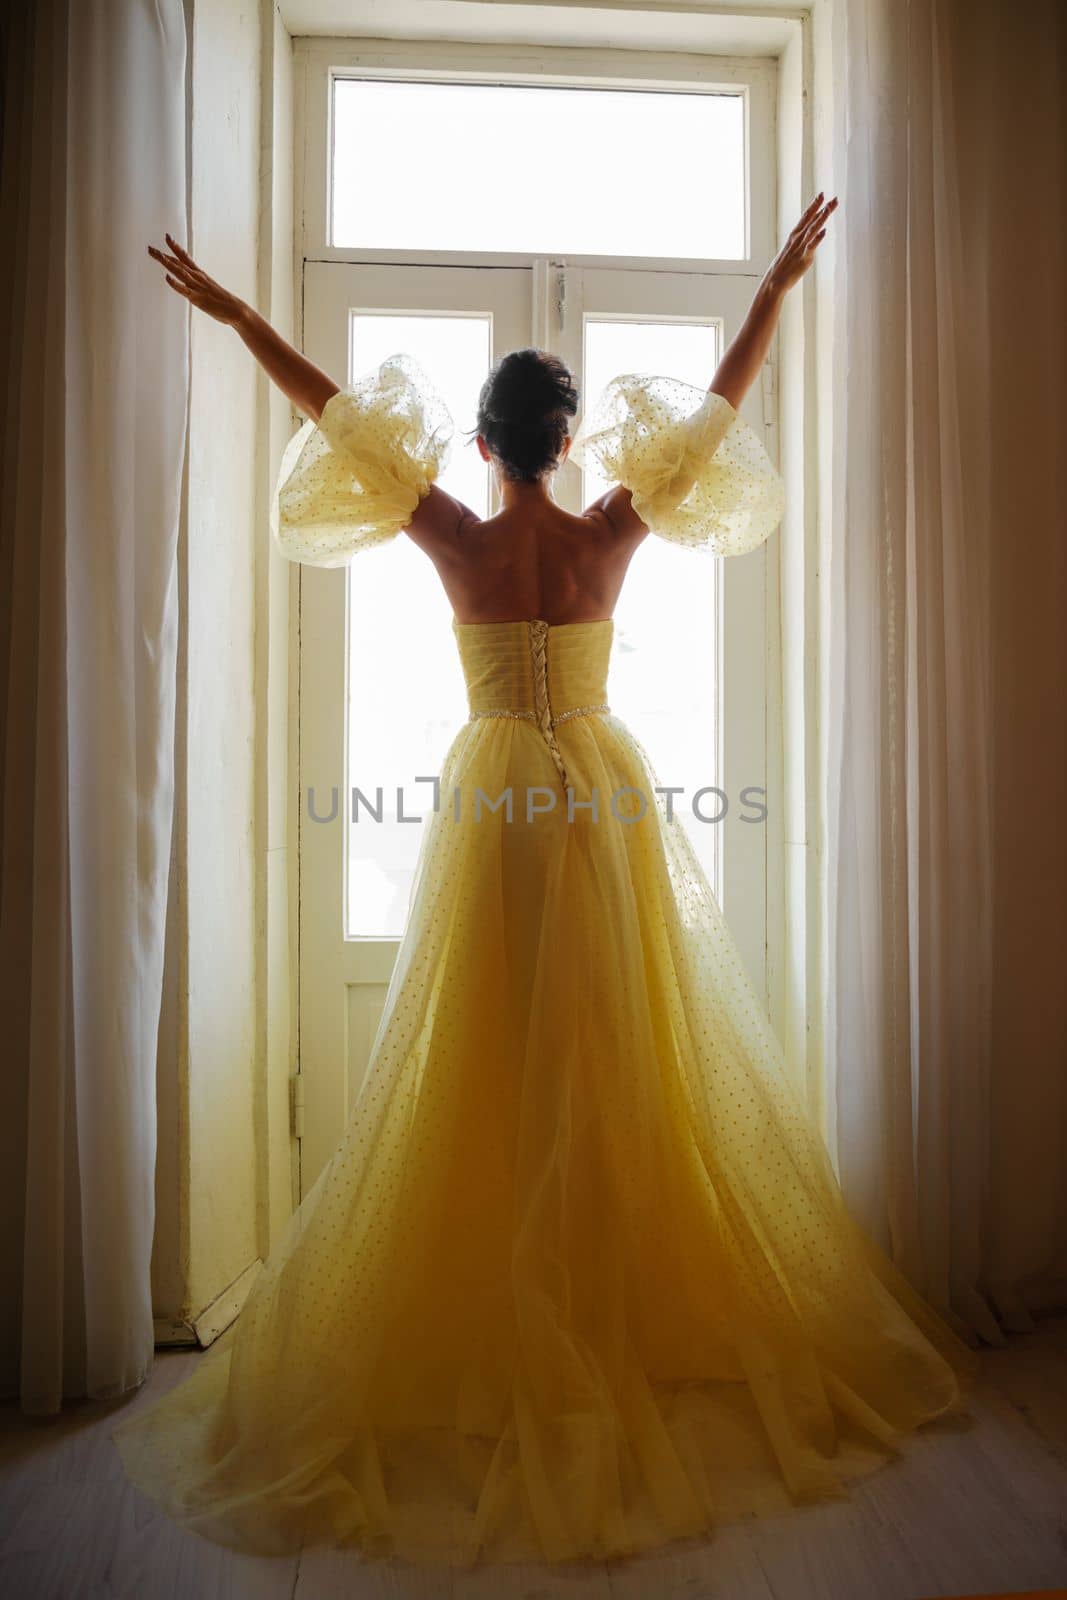 A woman's silhouette in a golden luxurious dress against the background of a window holds a curtain with her hands. Elegant lady in a yellow long silk dress with bare back, back view